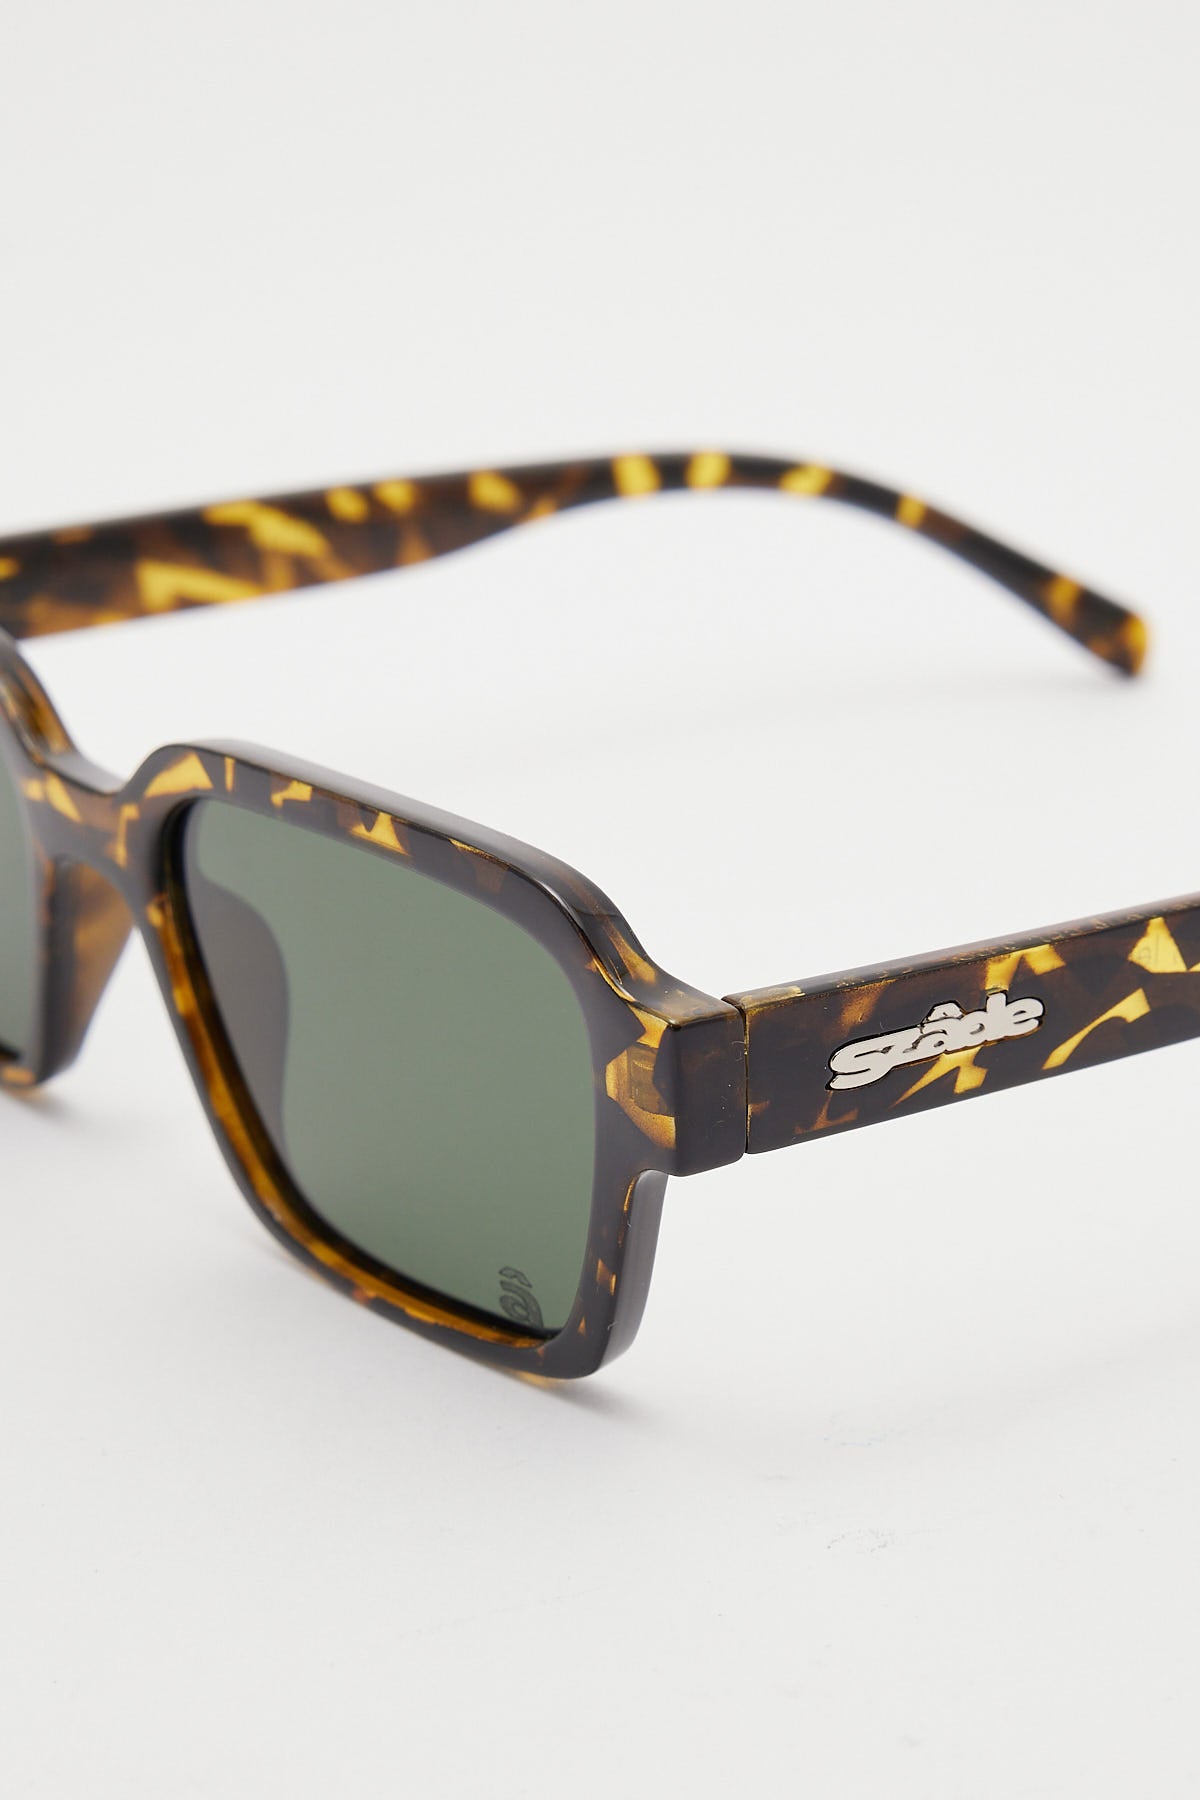 Szade Booth Wasp/Moss Polarized